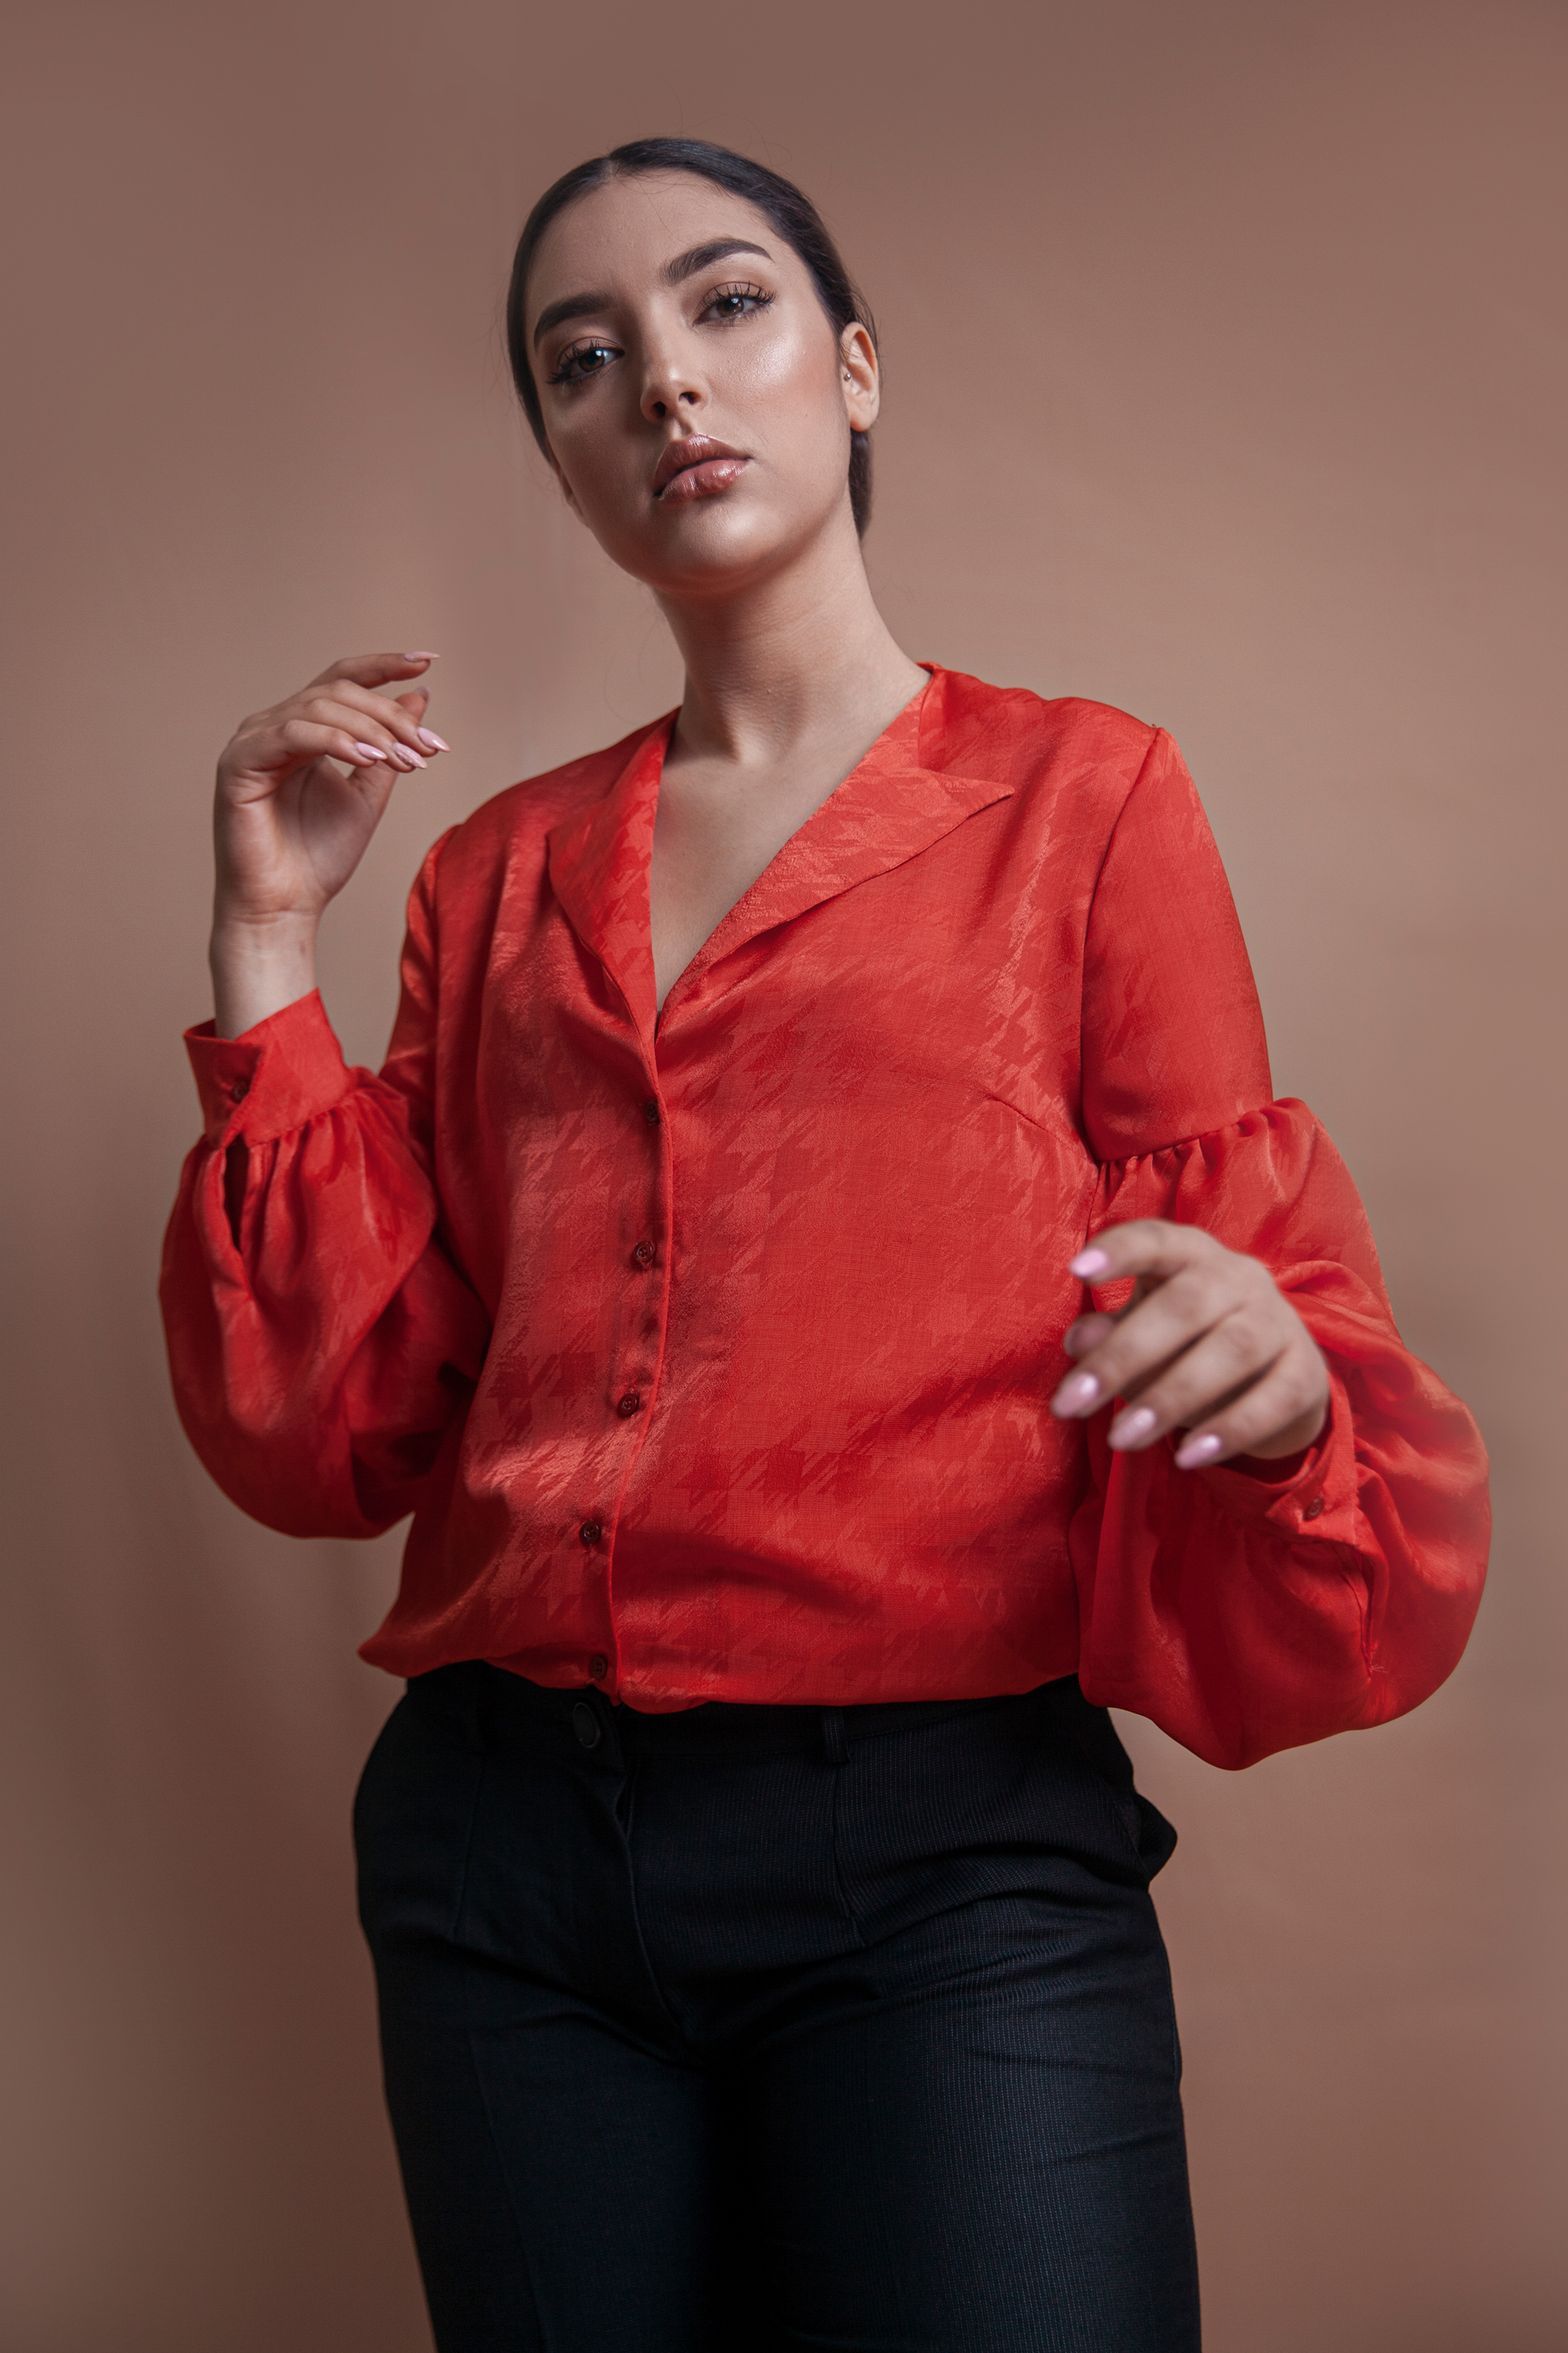 Coquelicot Red Pinted Shirt